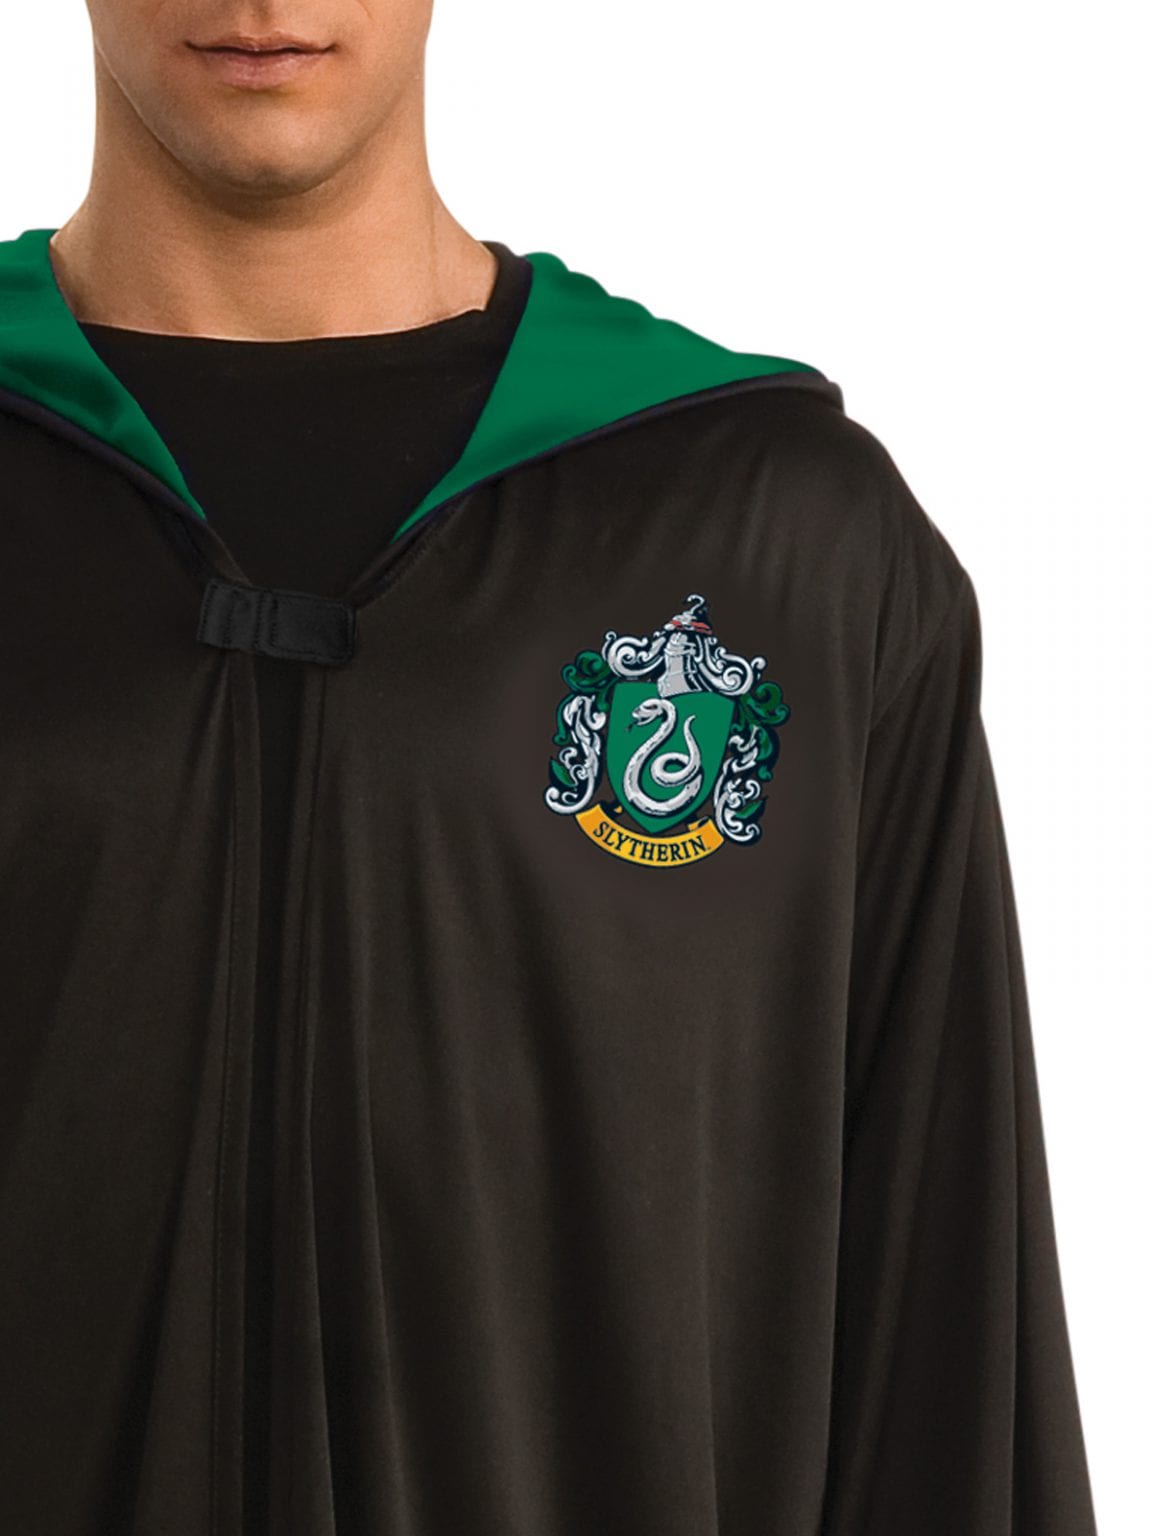 Slytherin Classic Robe, Adult - The Costumery